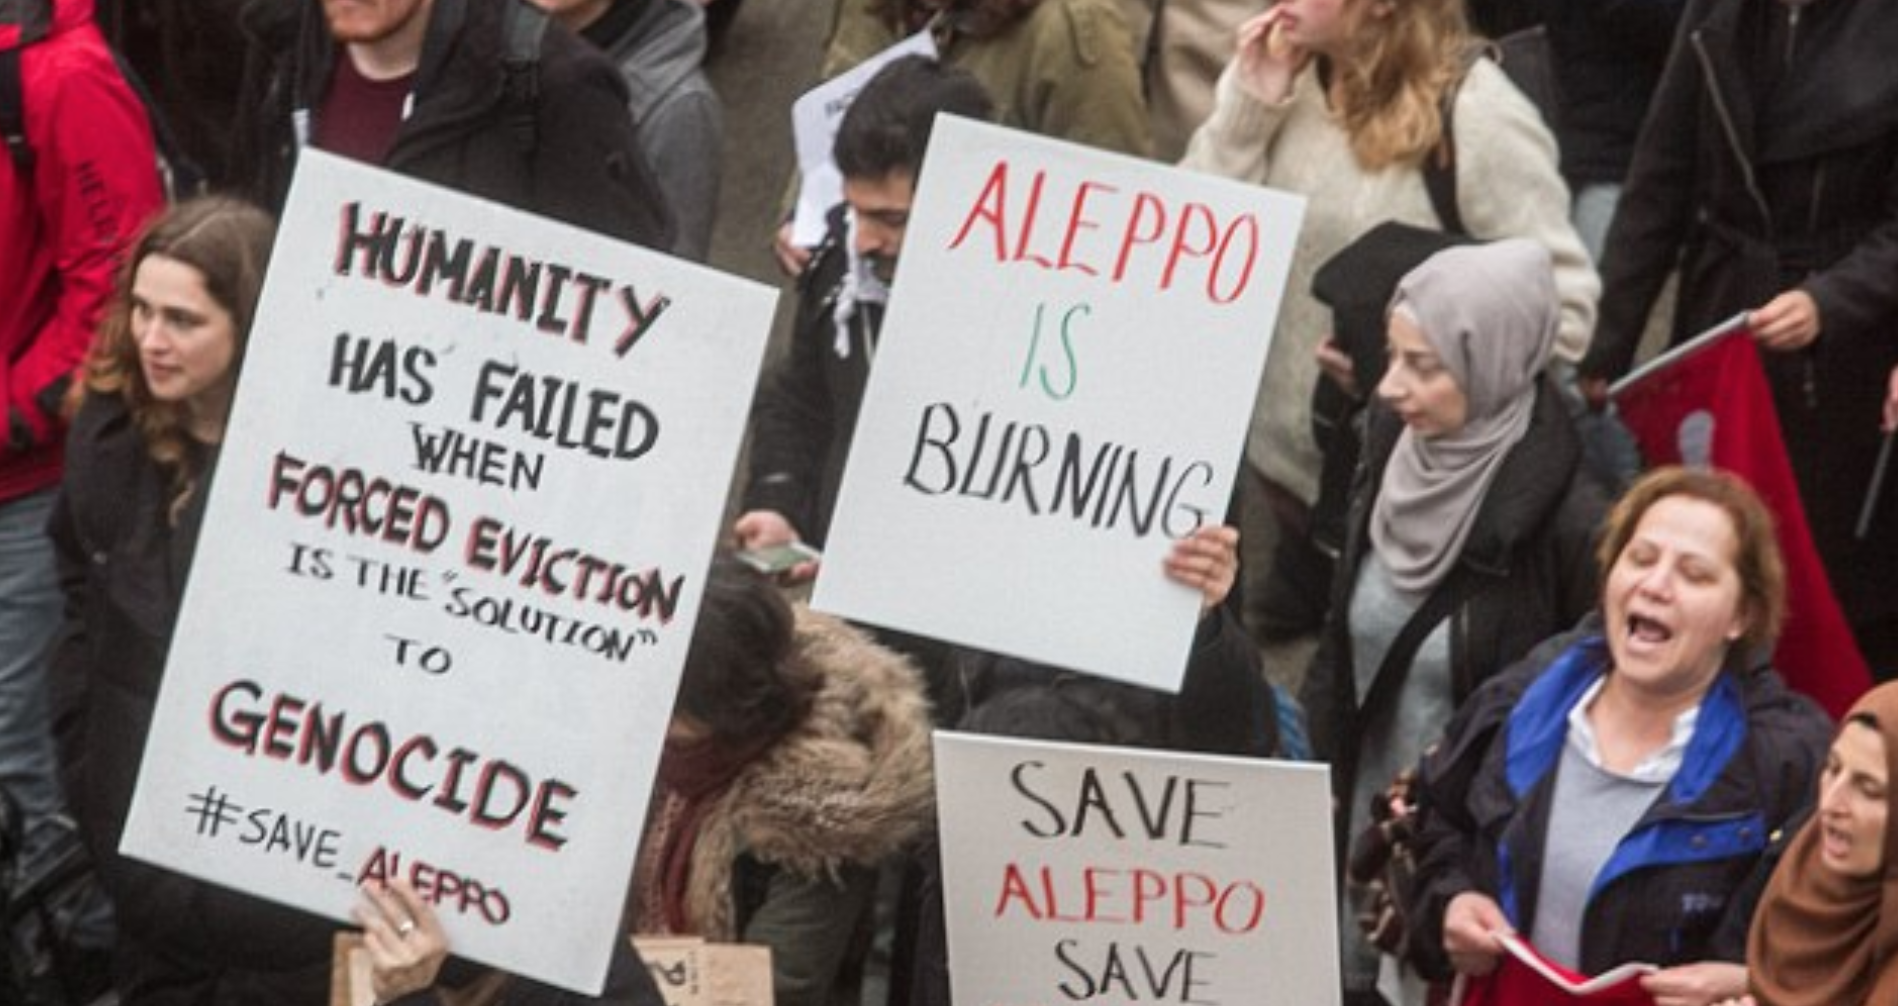 Campaign to save Aleppo from Assad’s Syrian regime